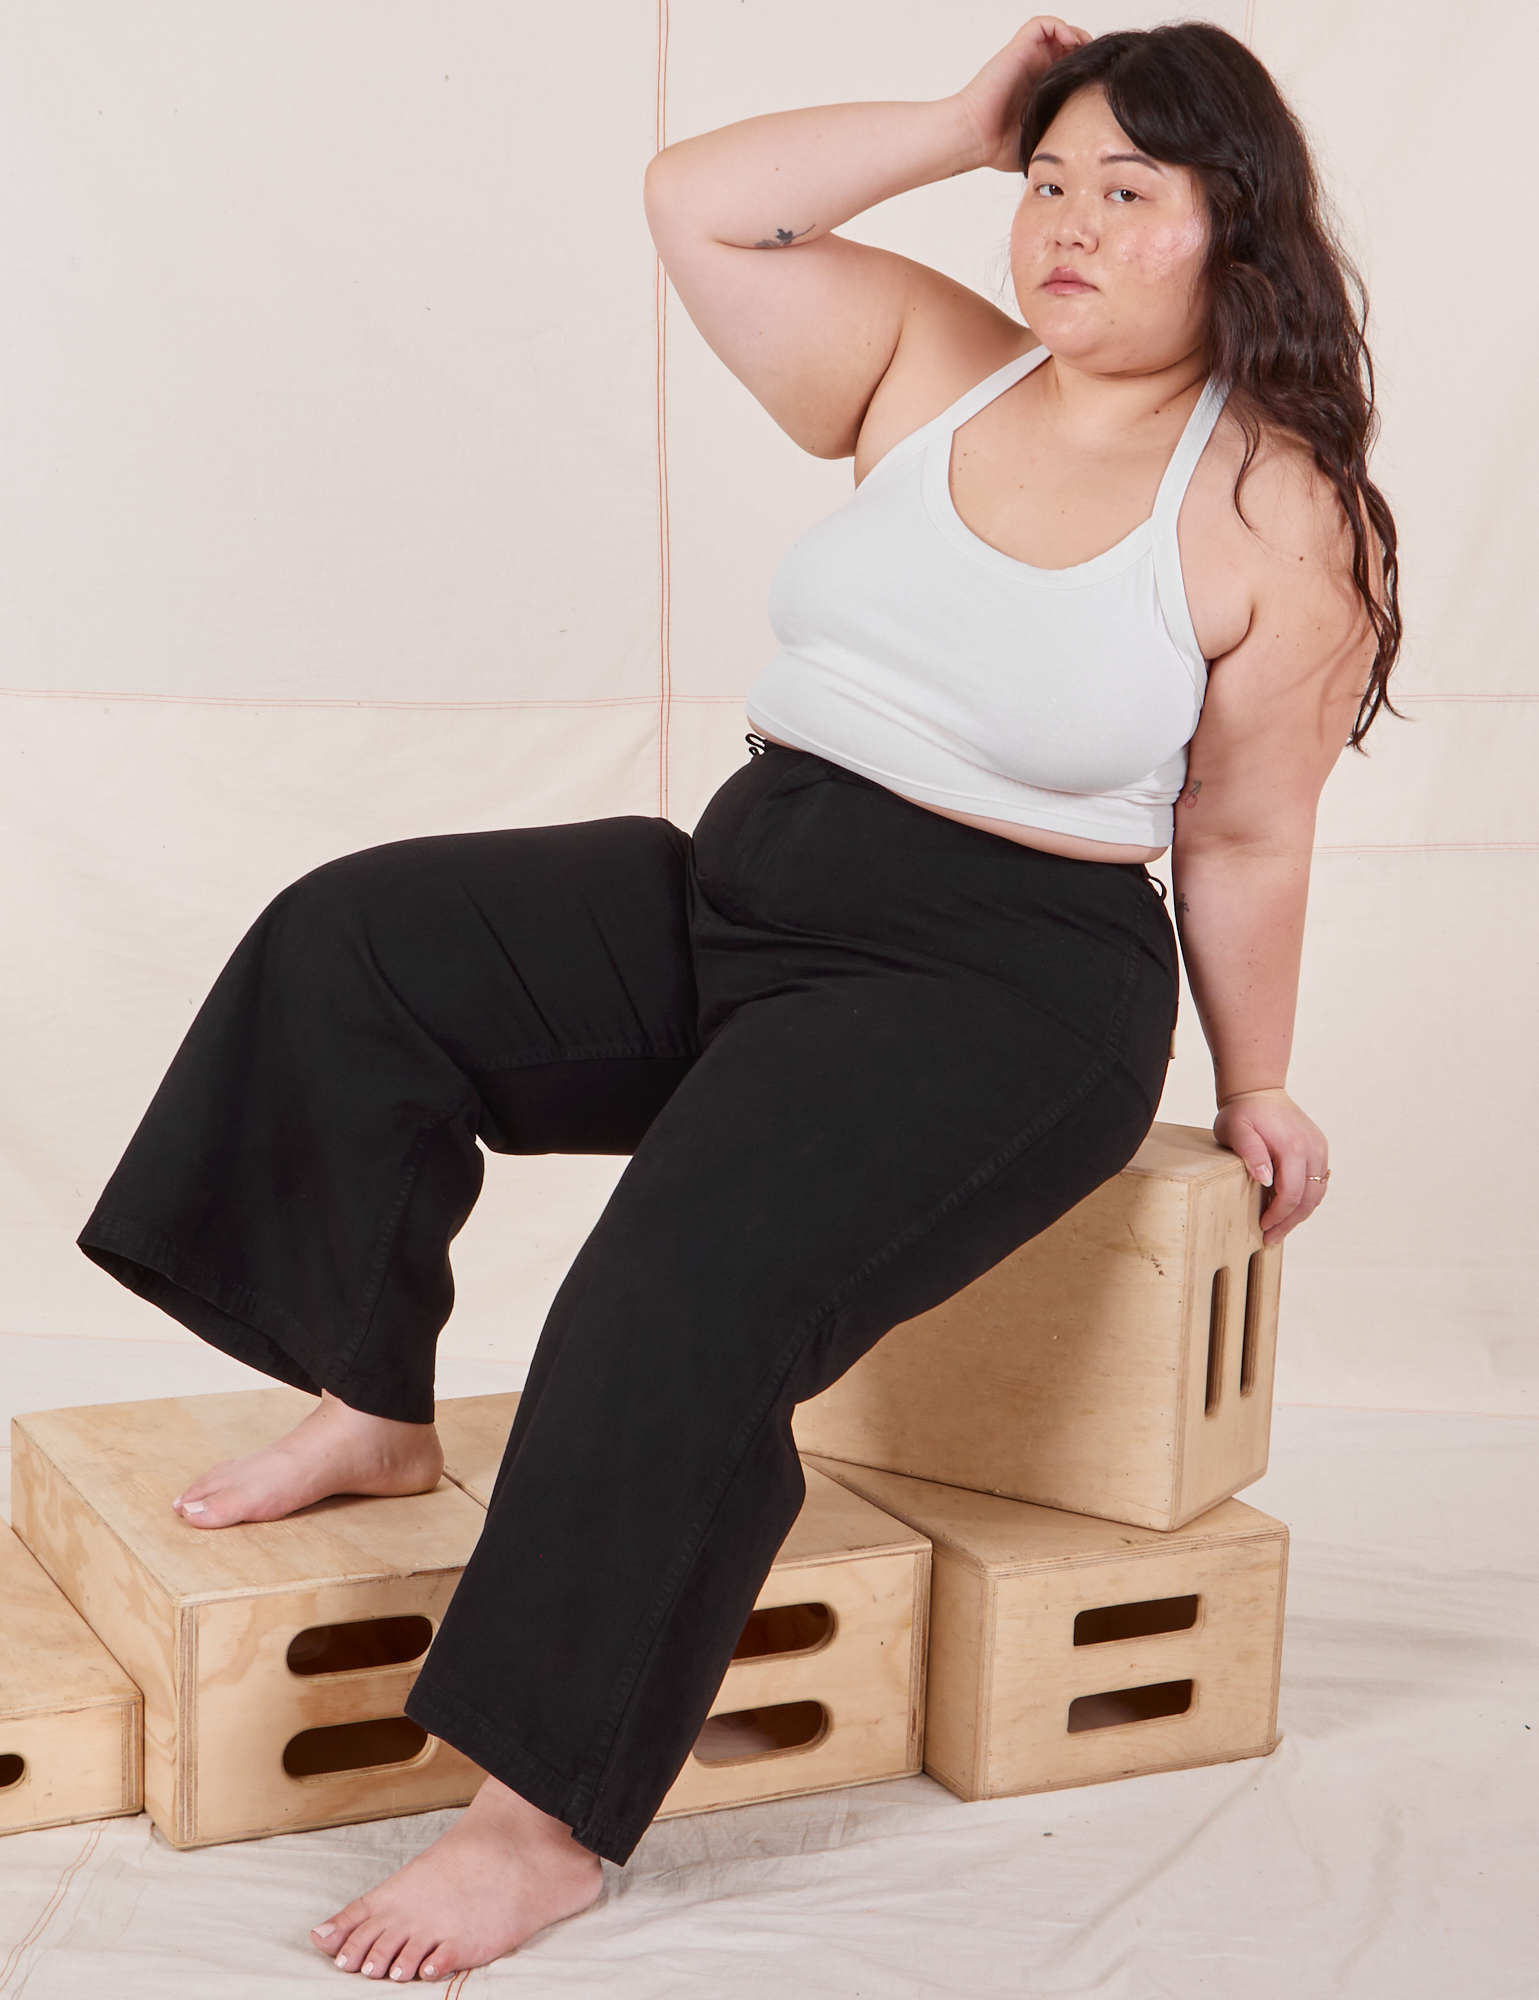 Ashley is wearing Petite Bell Bottoms in Basic Black and Halter Top in vintage tee off-white